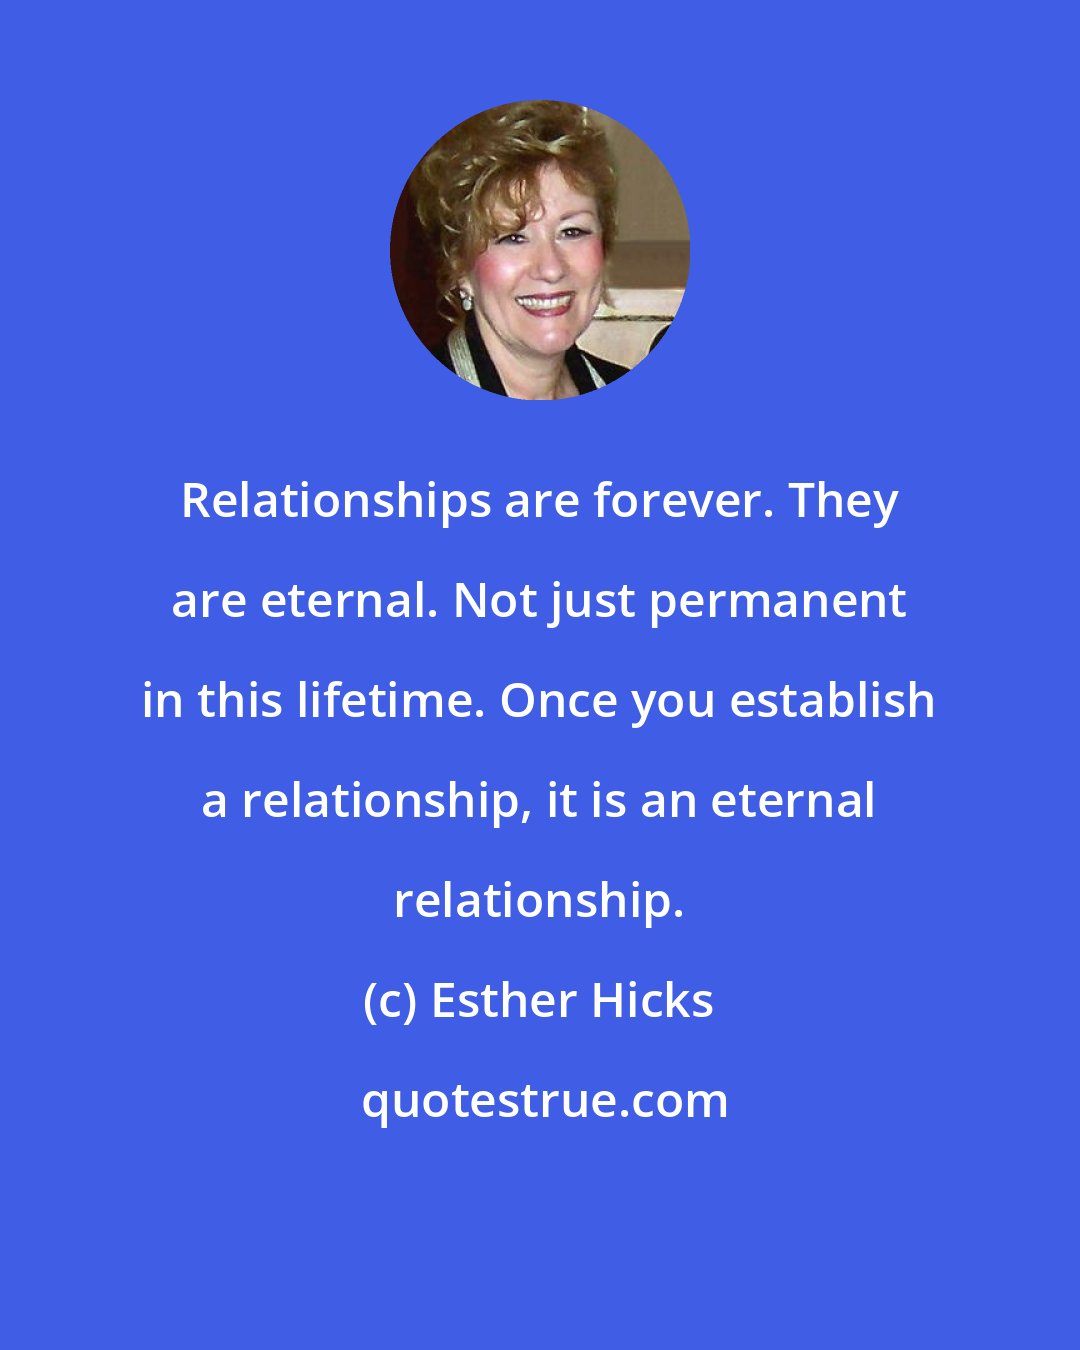 Esther Hicks: Relationships are forever. They are eternal. Not just permanent in this lifetime. Once you establish a relationship, it is an eternal relationship.